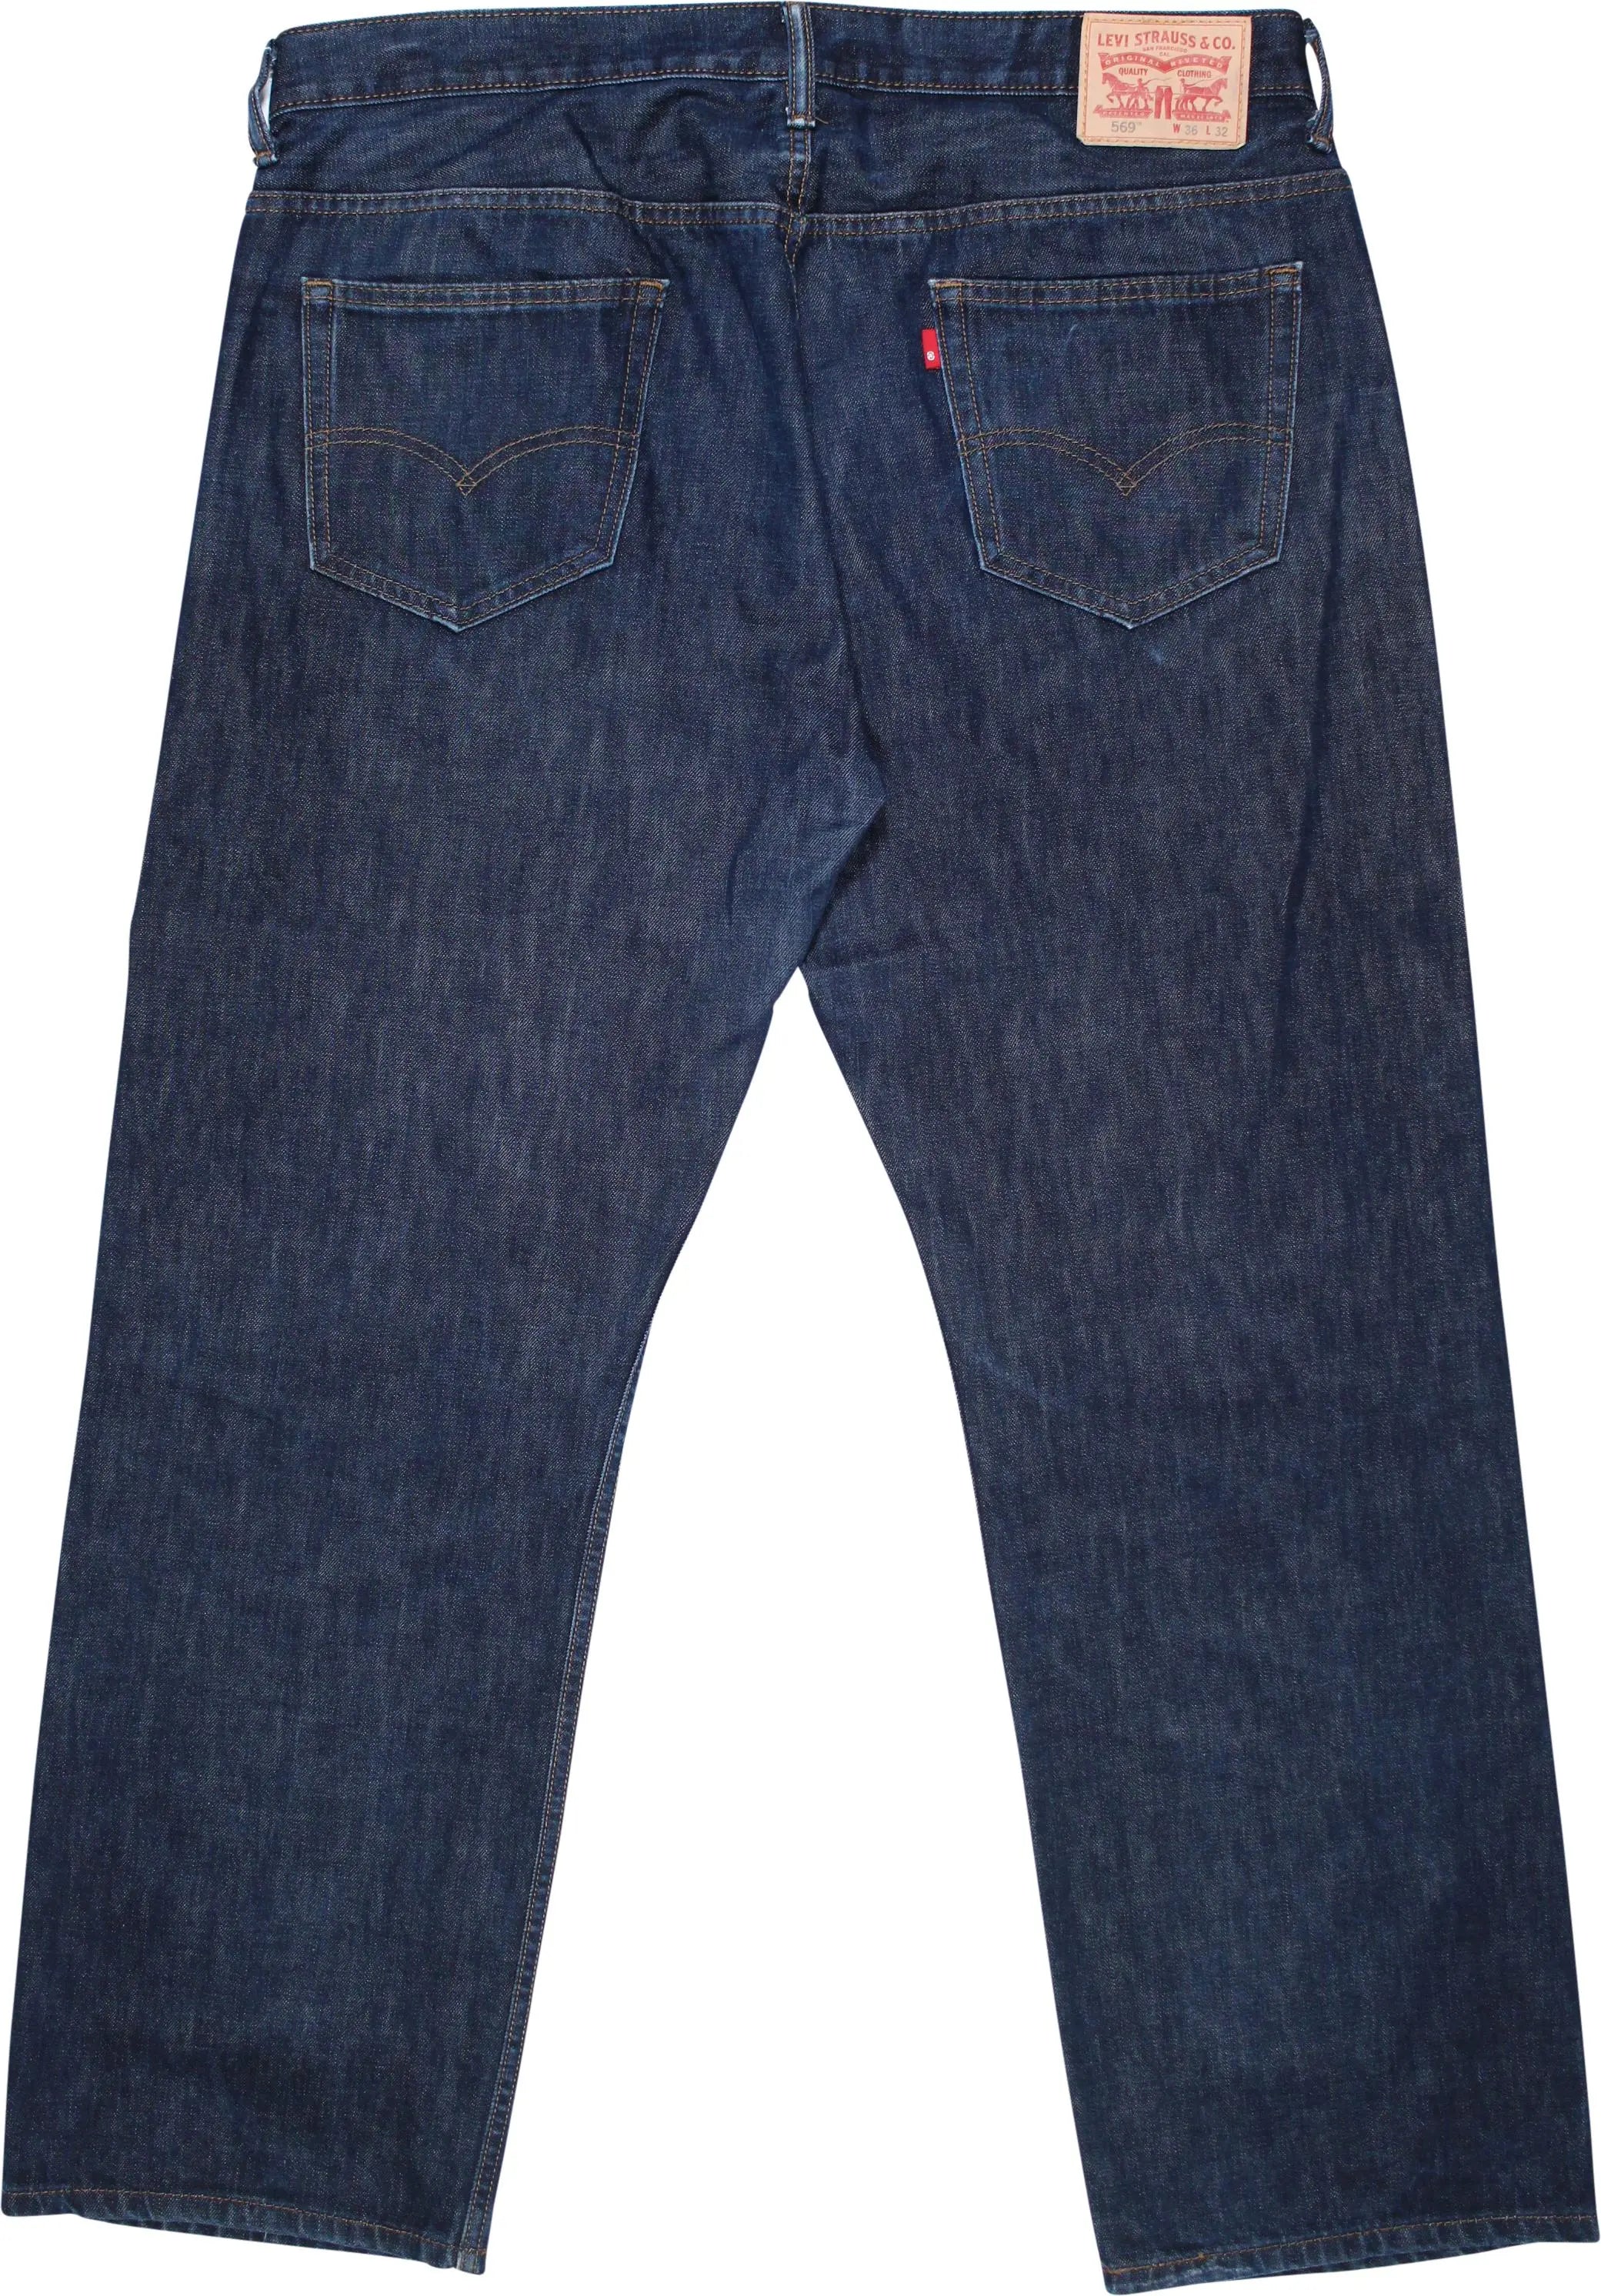 Levi's - 569 Jeans by Levi's- ThriftTale.com - Vintage and second handclothing